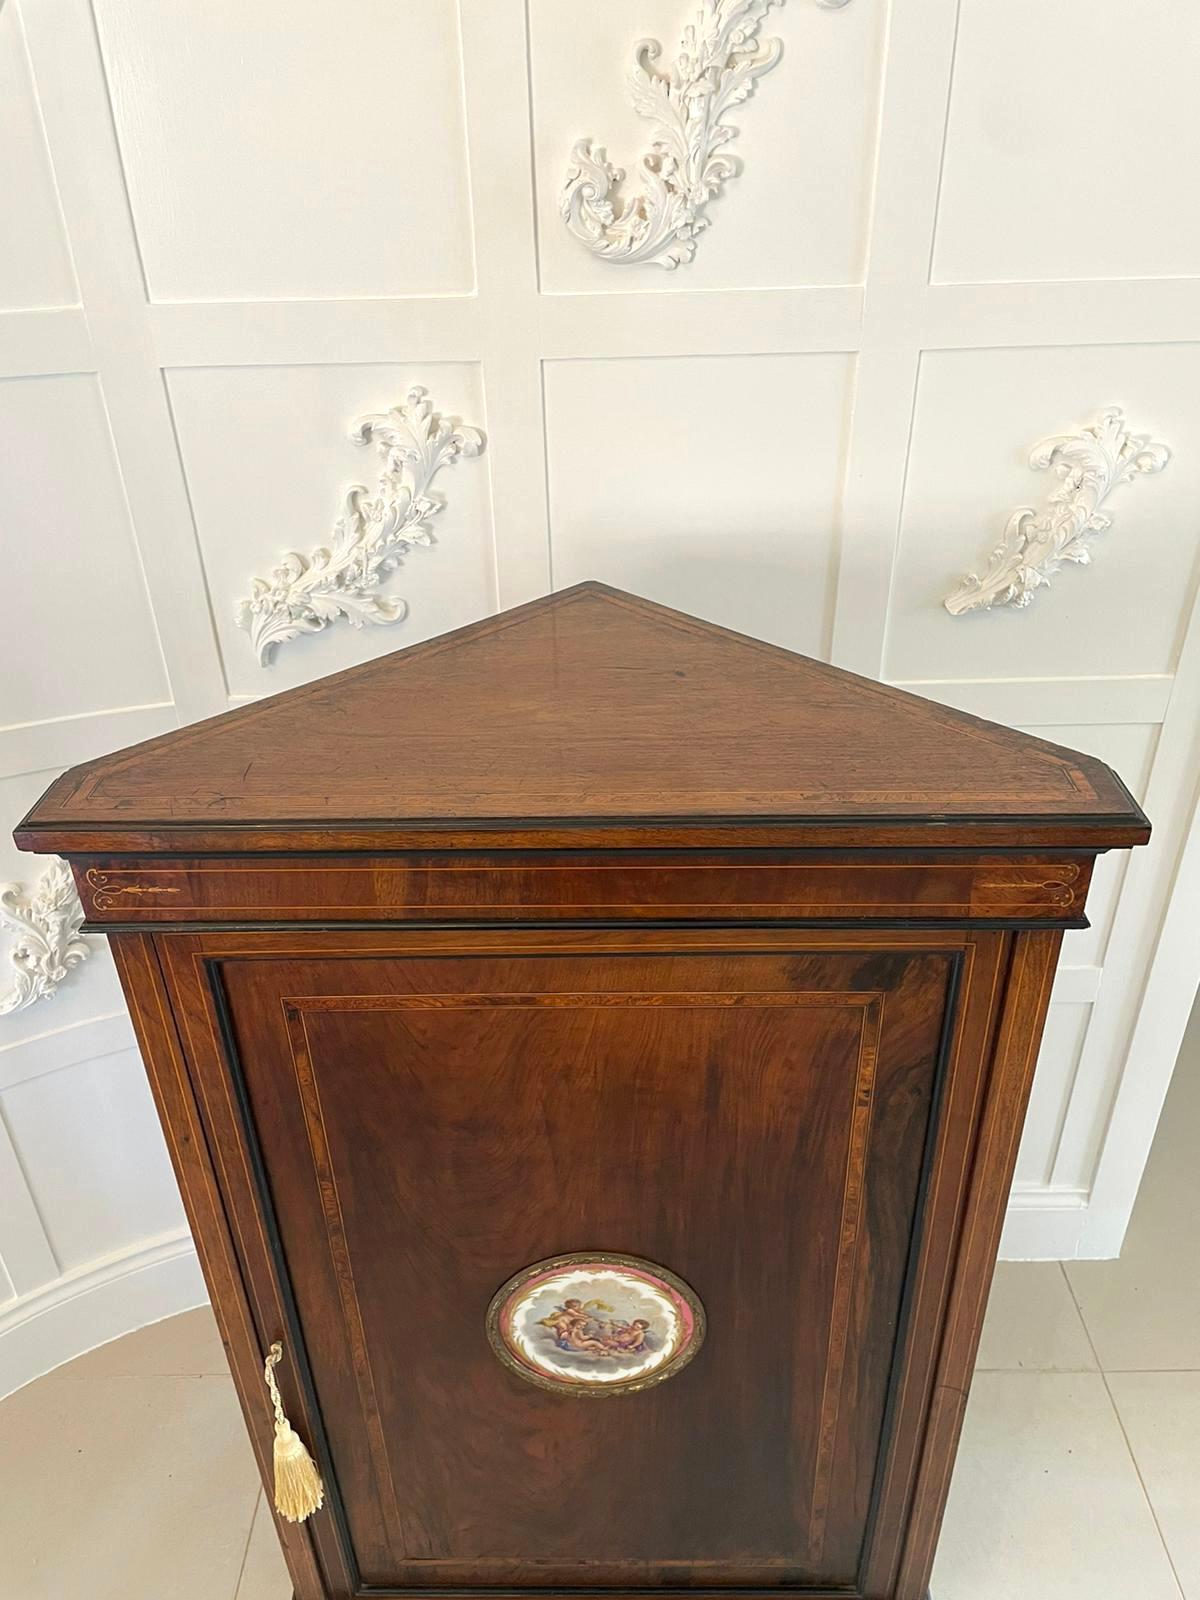 Finest Quality 19th Century Victorian Antique Inlaid Walnut Corner Cabinet In Good Condition For Sale In Suffolk, GB